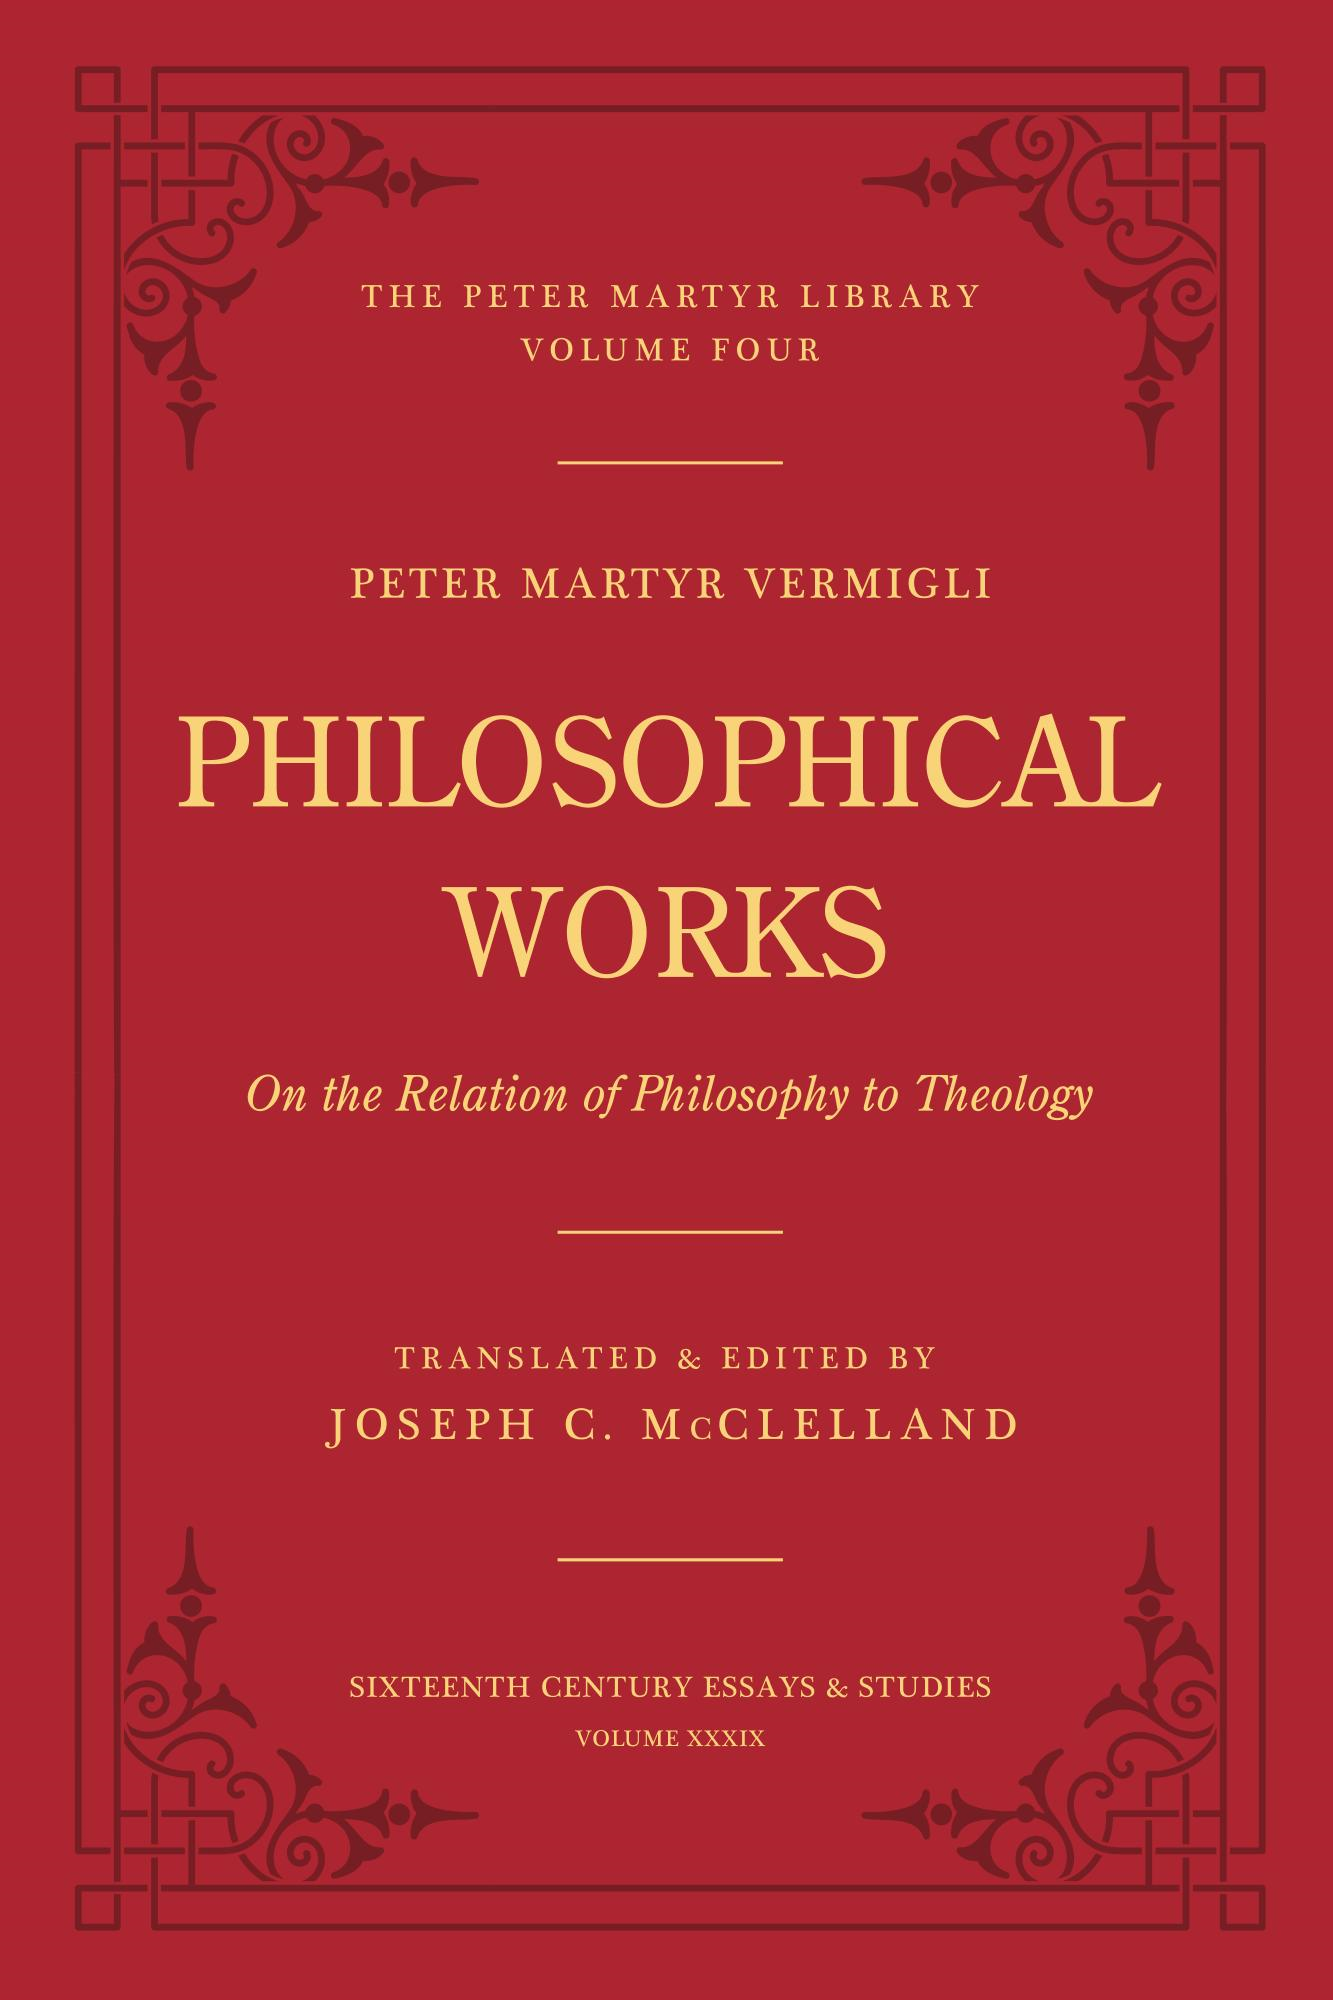 Volume 4 Philosophical Works: On the Relation of Philosophy to Theology